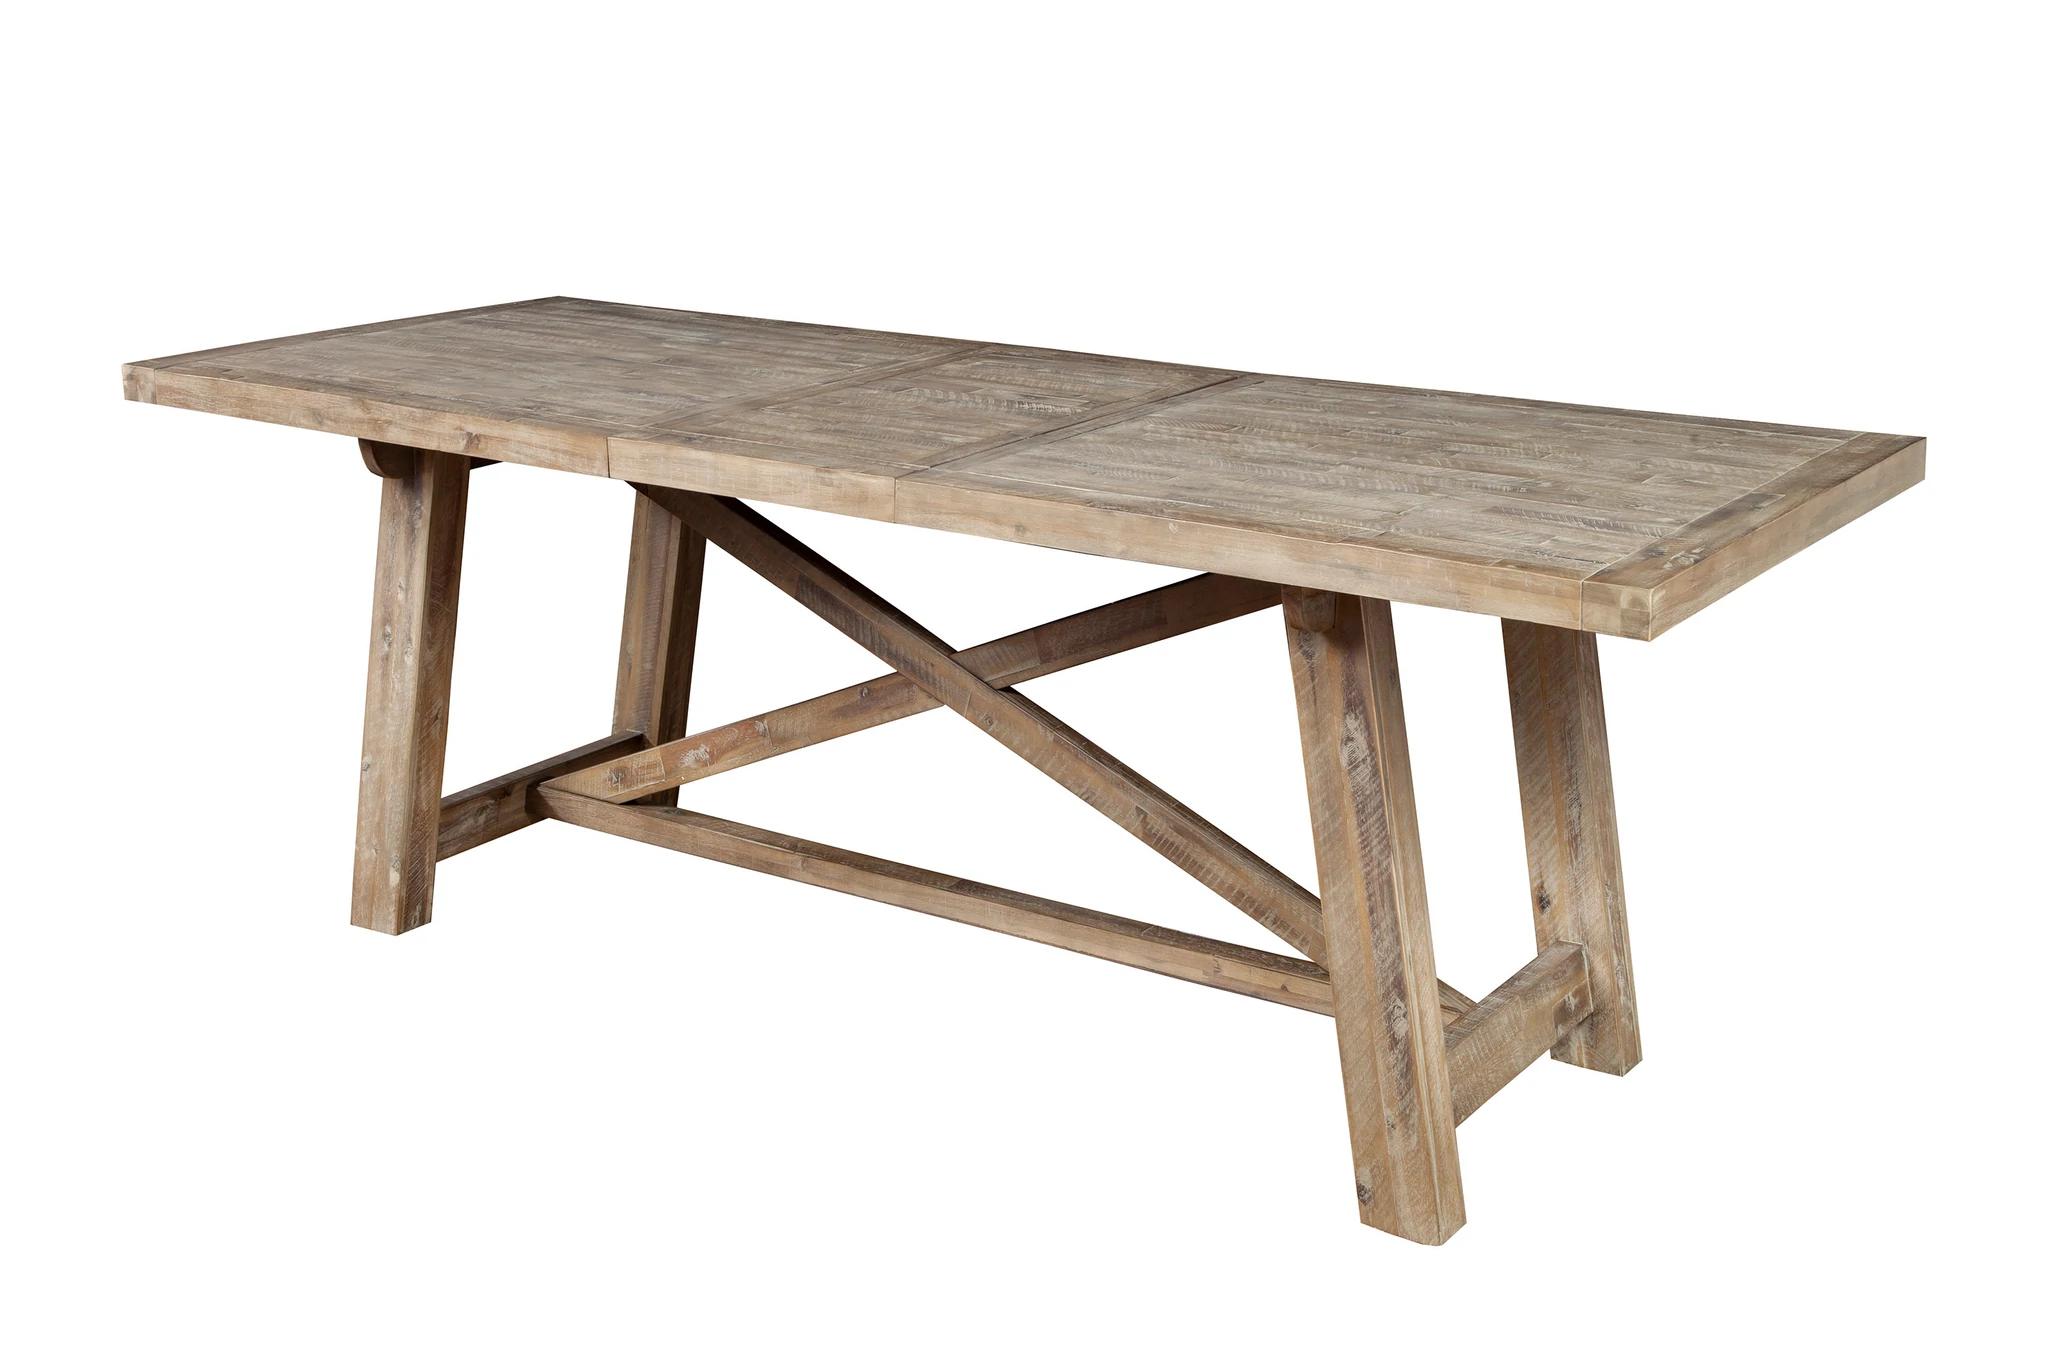 Contemporary, Rustic Dining Table NEWBERRY 2068-01 in Natural 